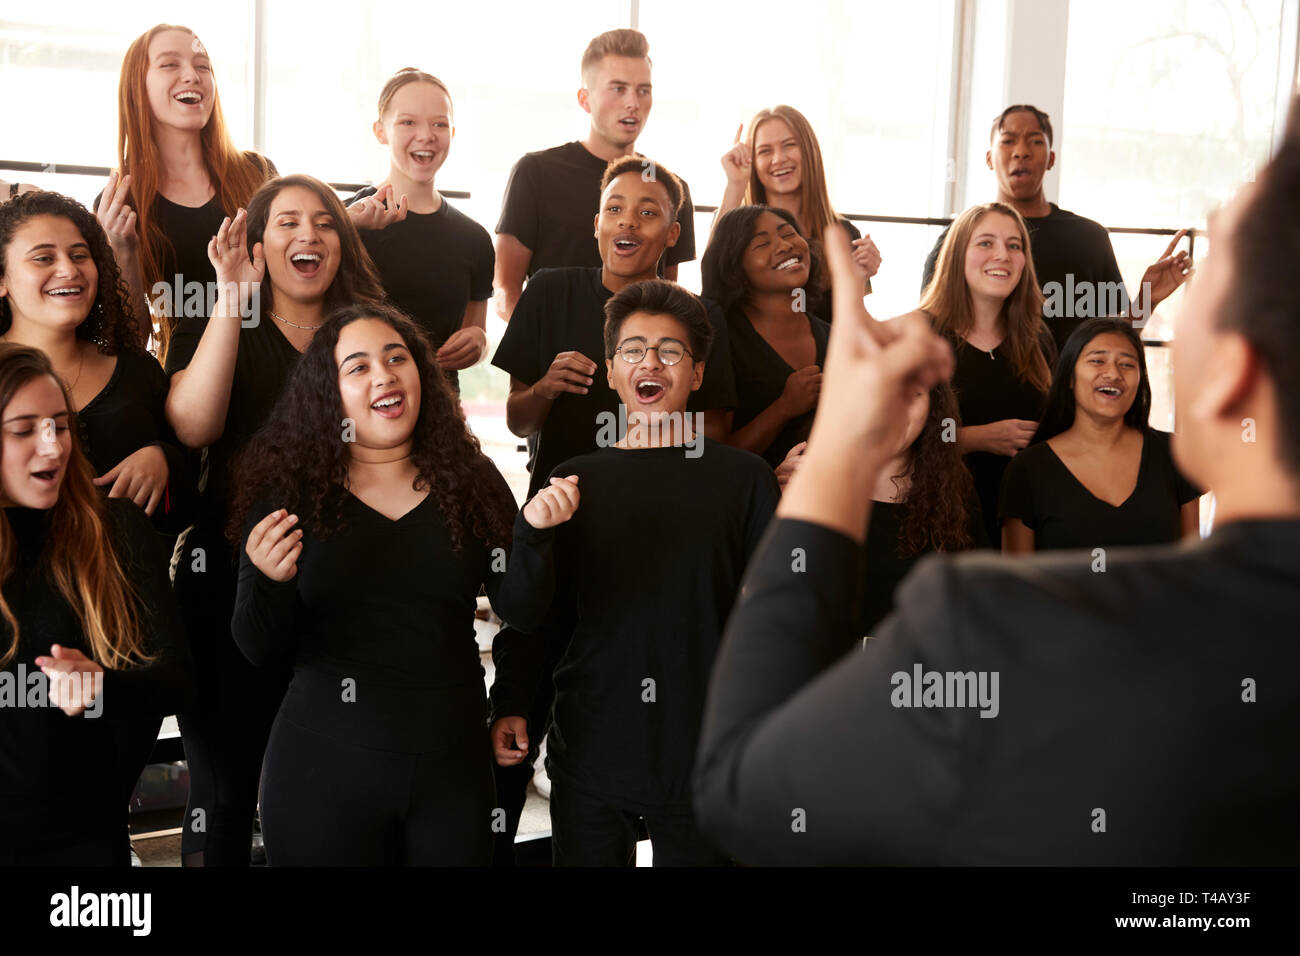 Male And Female Students Singing In Choir With Teacher At Performing Arts School Stock Photo